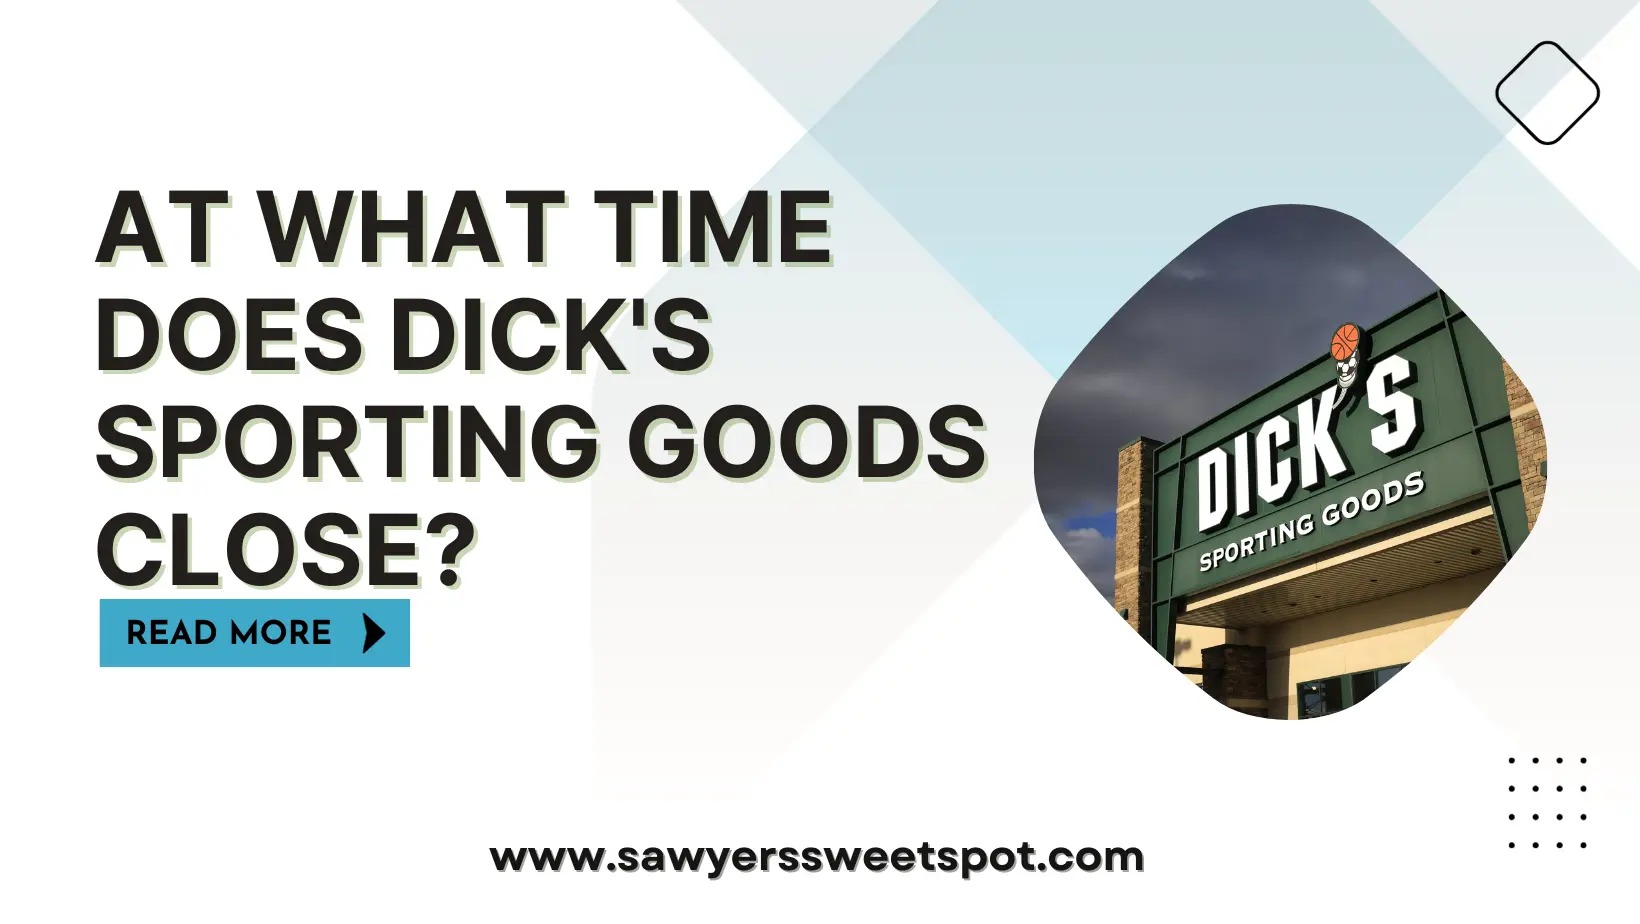 At What Time Does Dick's Sporting Goods Close?